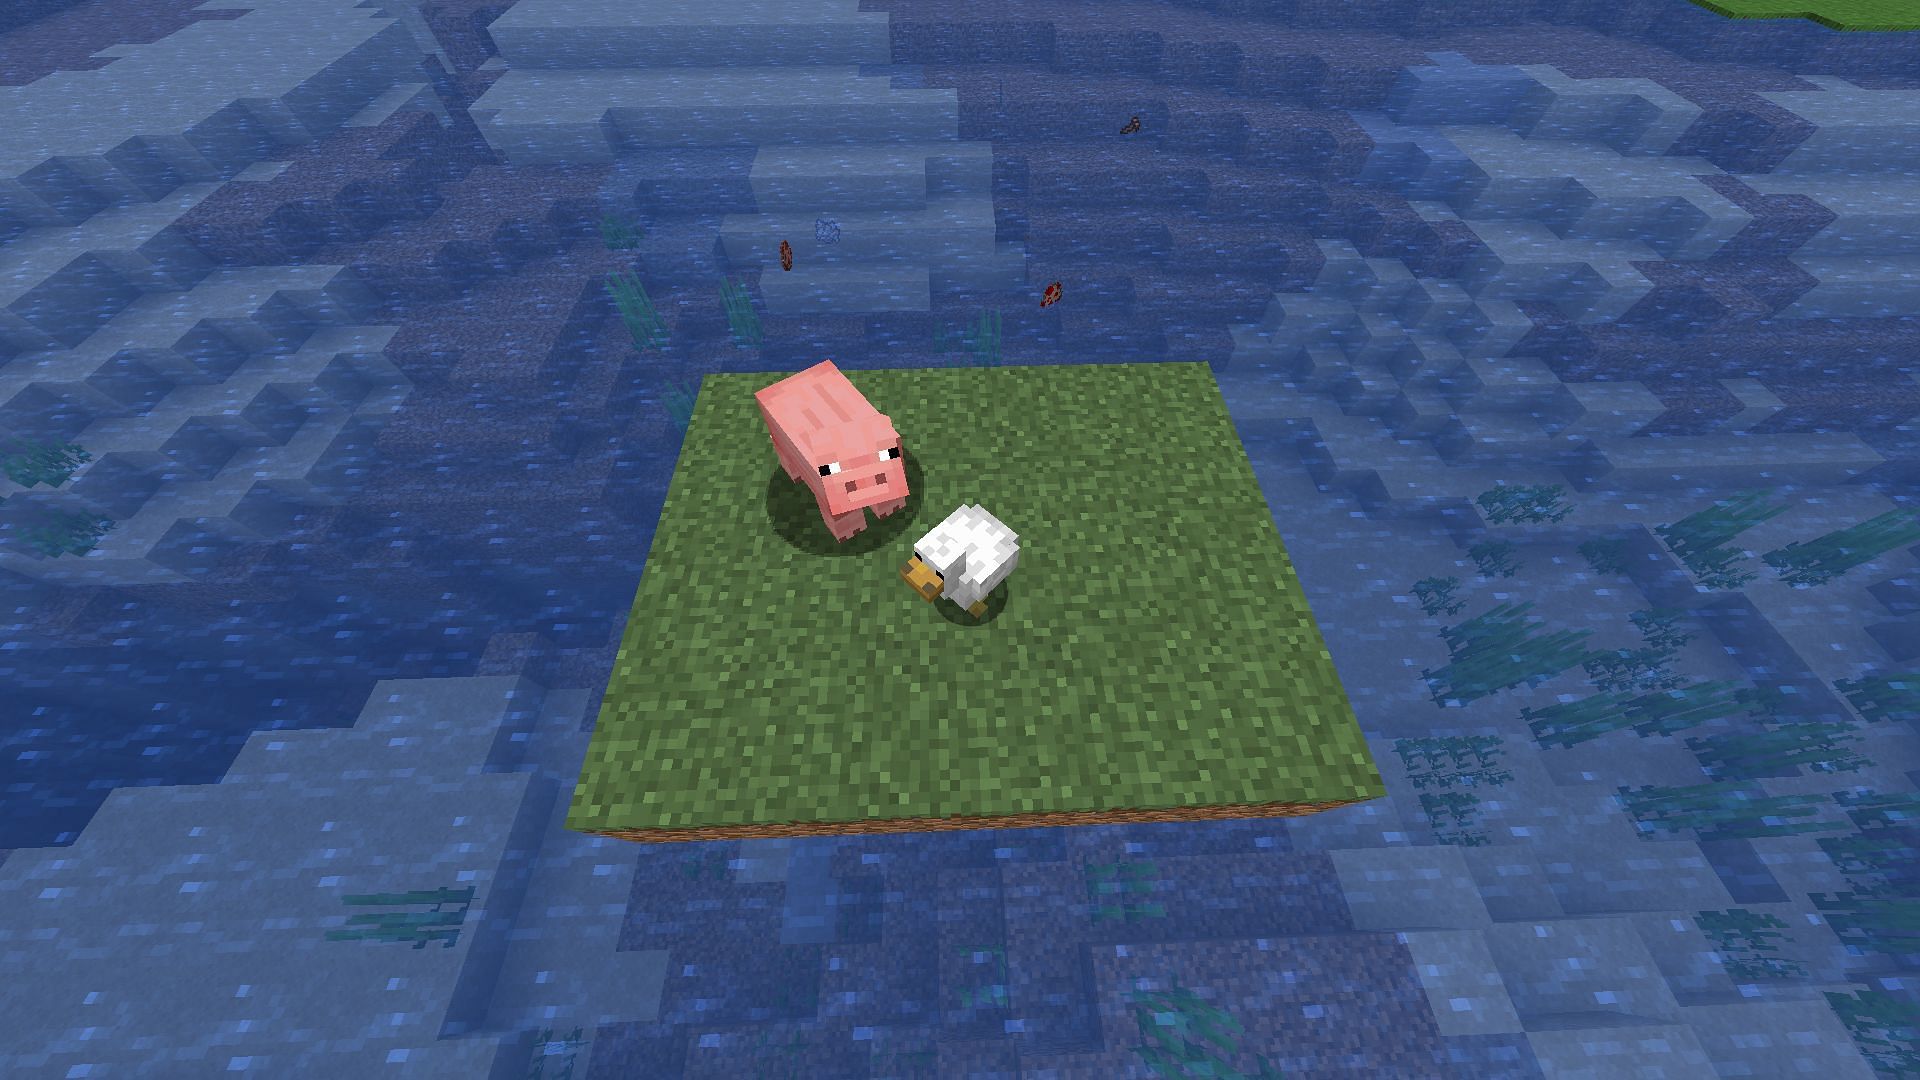 To test the ride command in Minecraft, players can place two mobs on an island to prevent them from moving. (Image via Mojang)